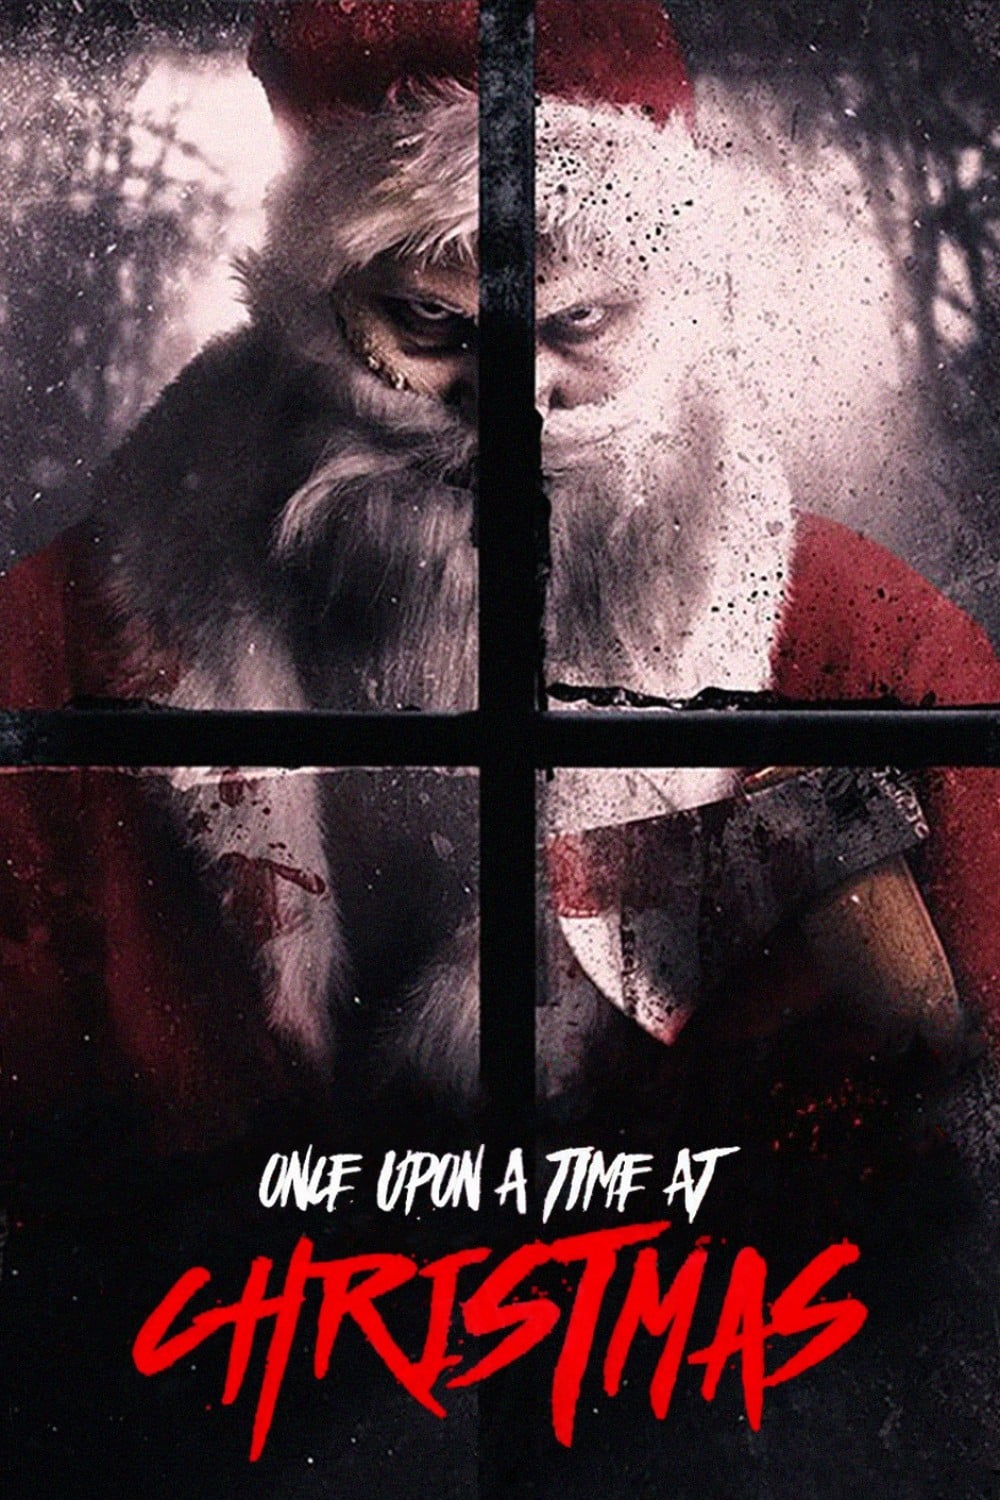 Poster for the movie "Once Upon a Time at Christmas"